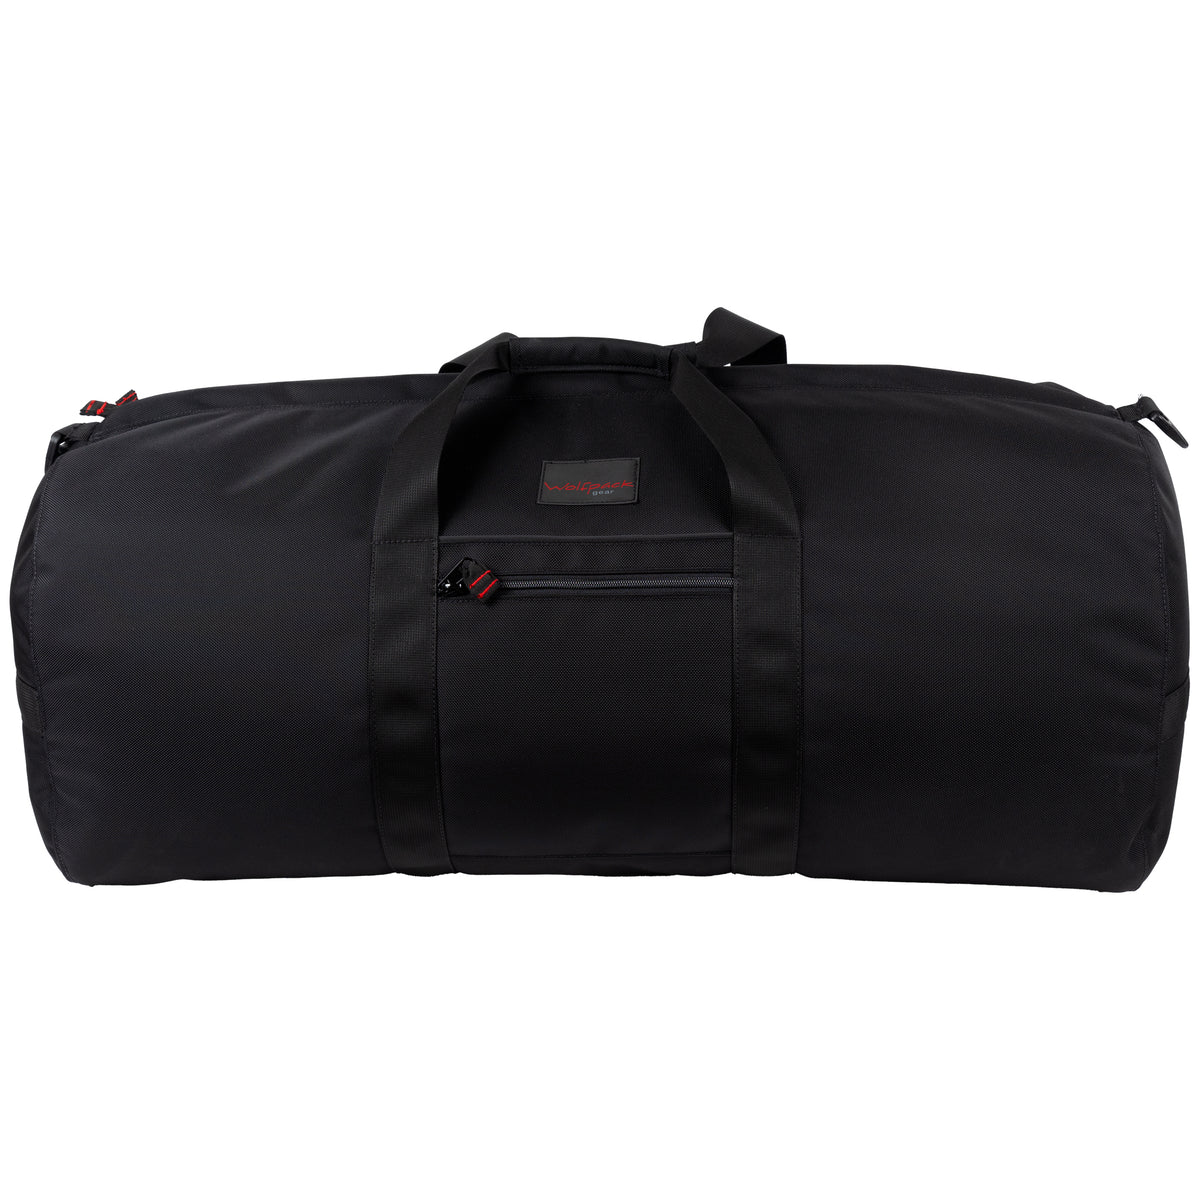 Wolfpack Gear™ Large Duffle Bag. Made in USA